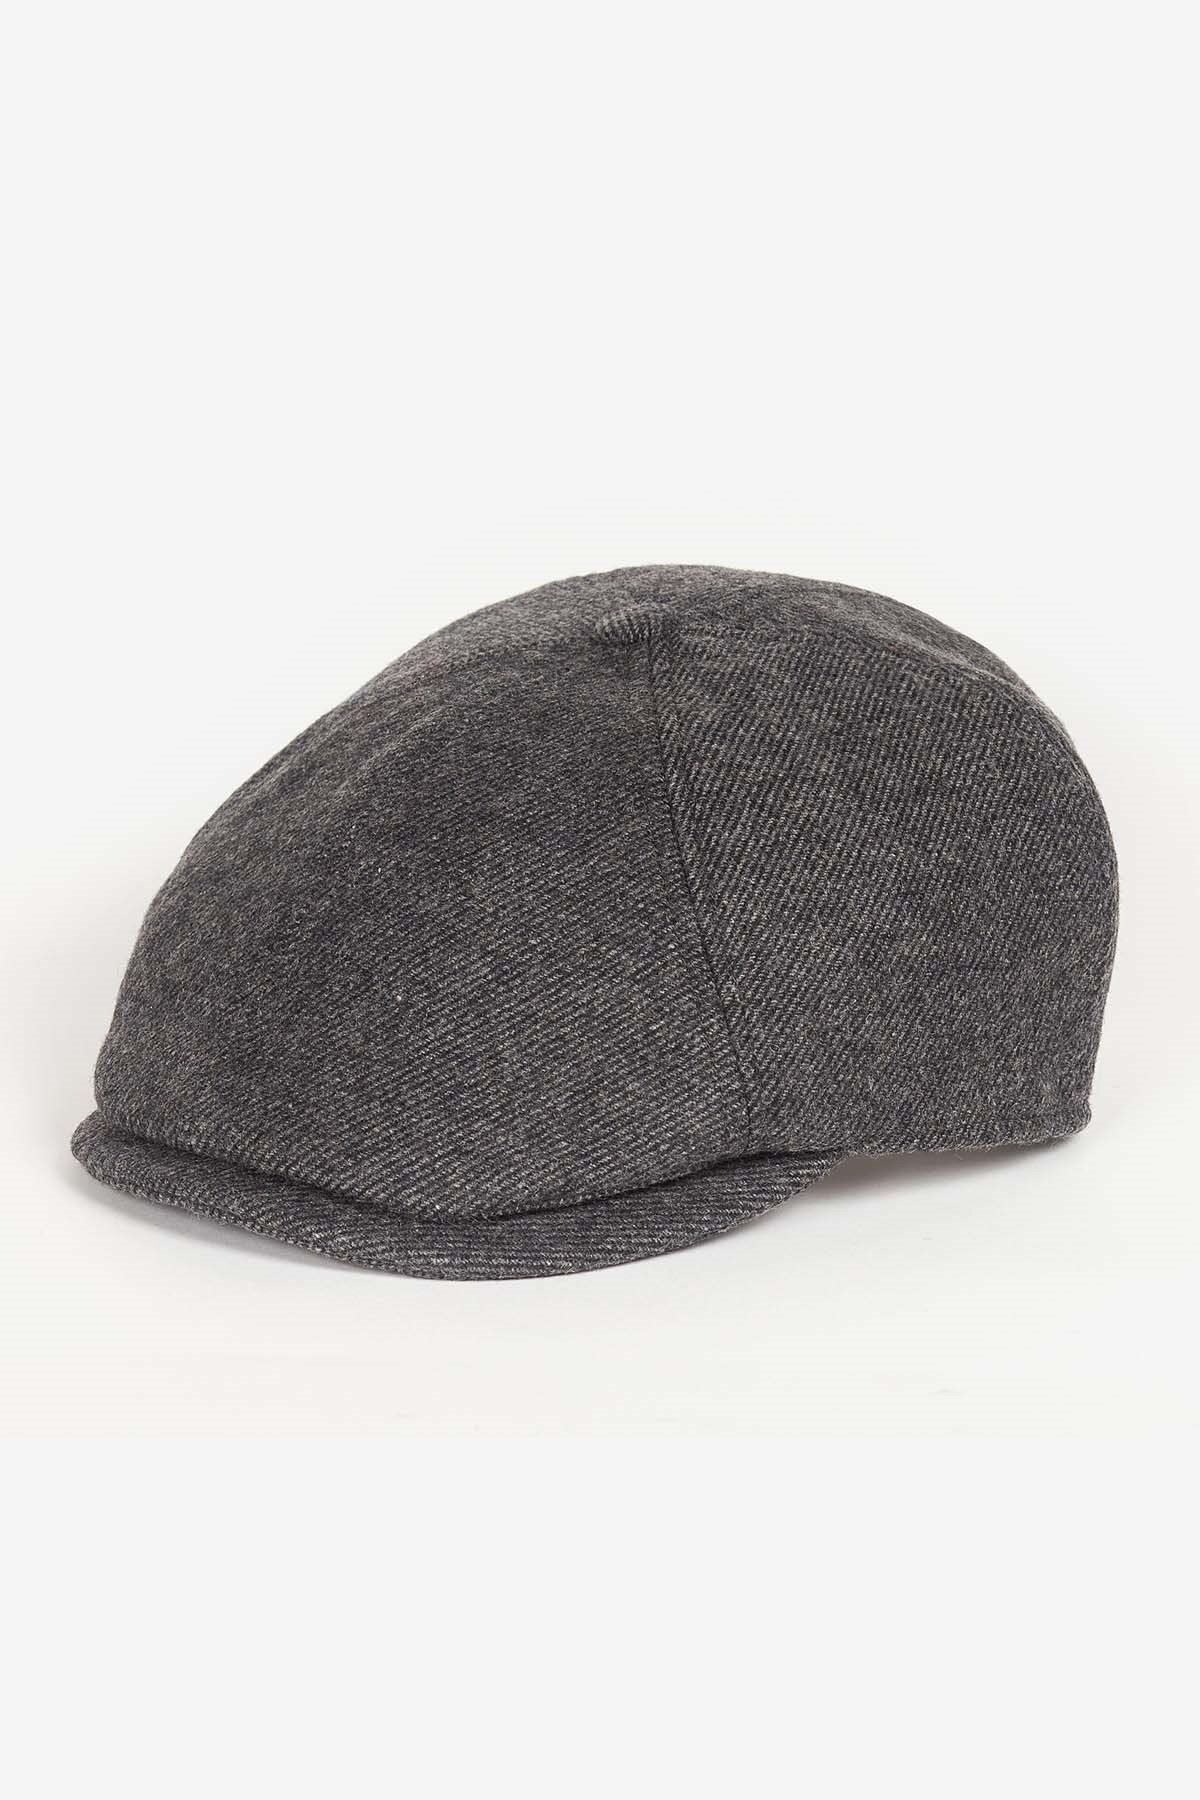 Barbour Claymore Baker Hat CH15 خاکستری